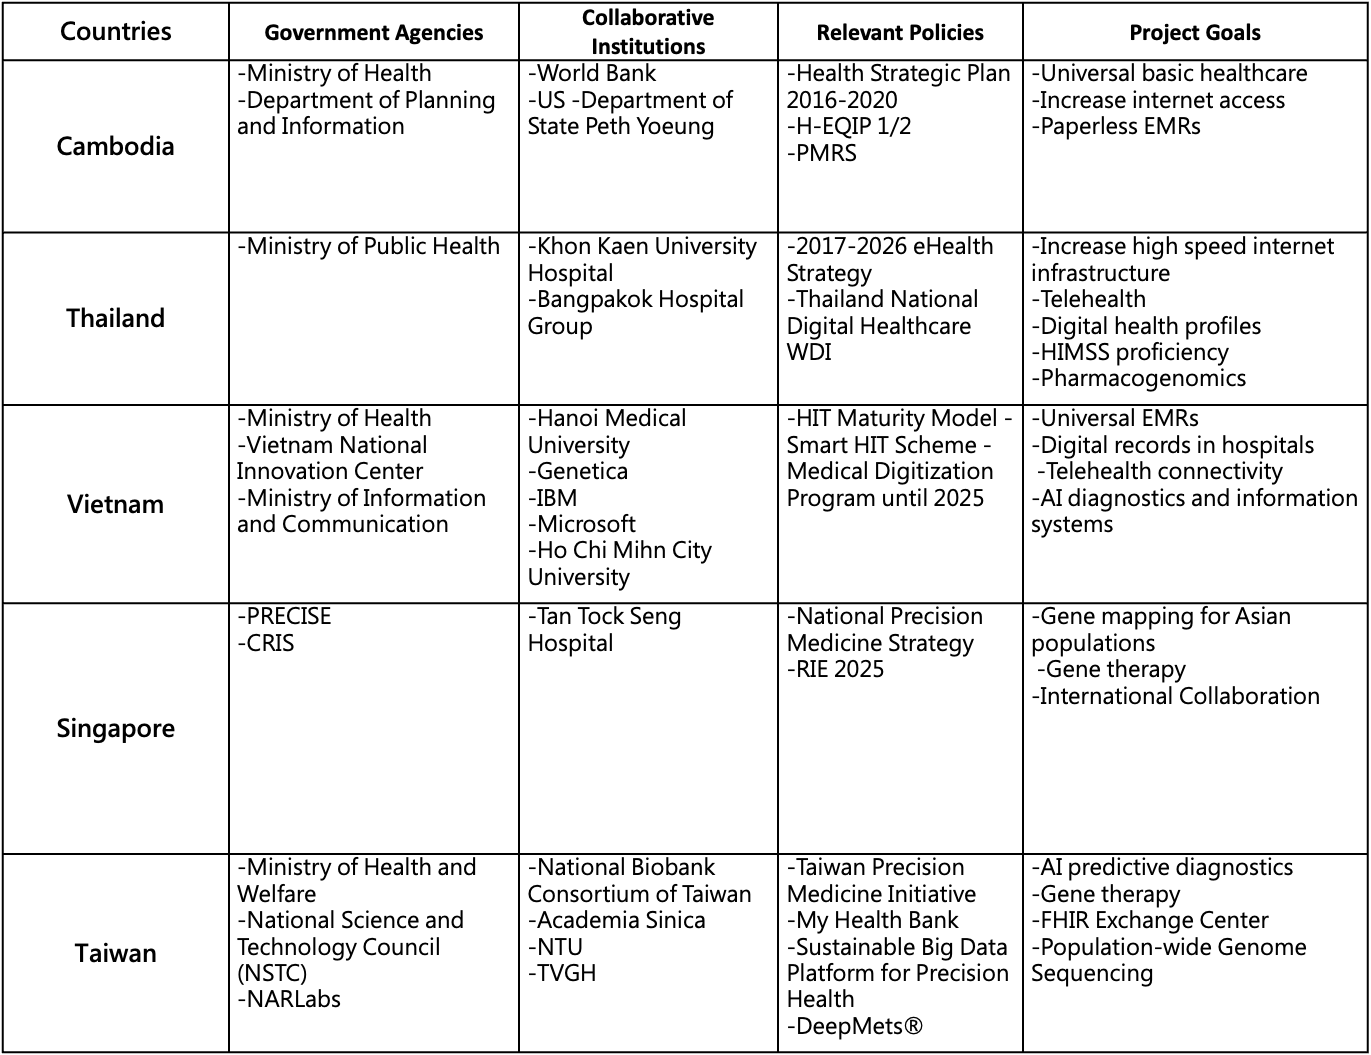 A list of relevant institutions and policy objectives of the new Southbound countries' precision medicine programs